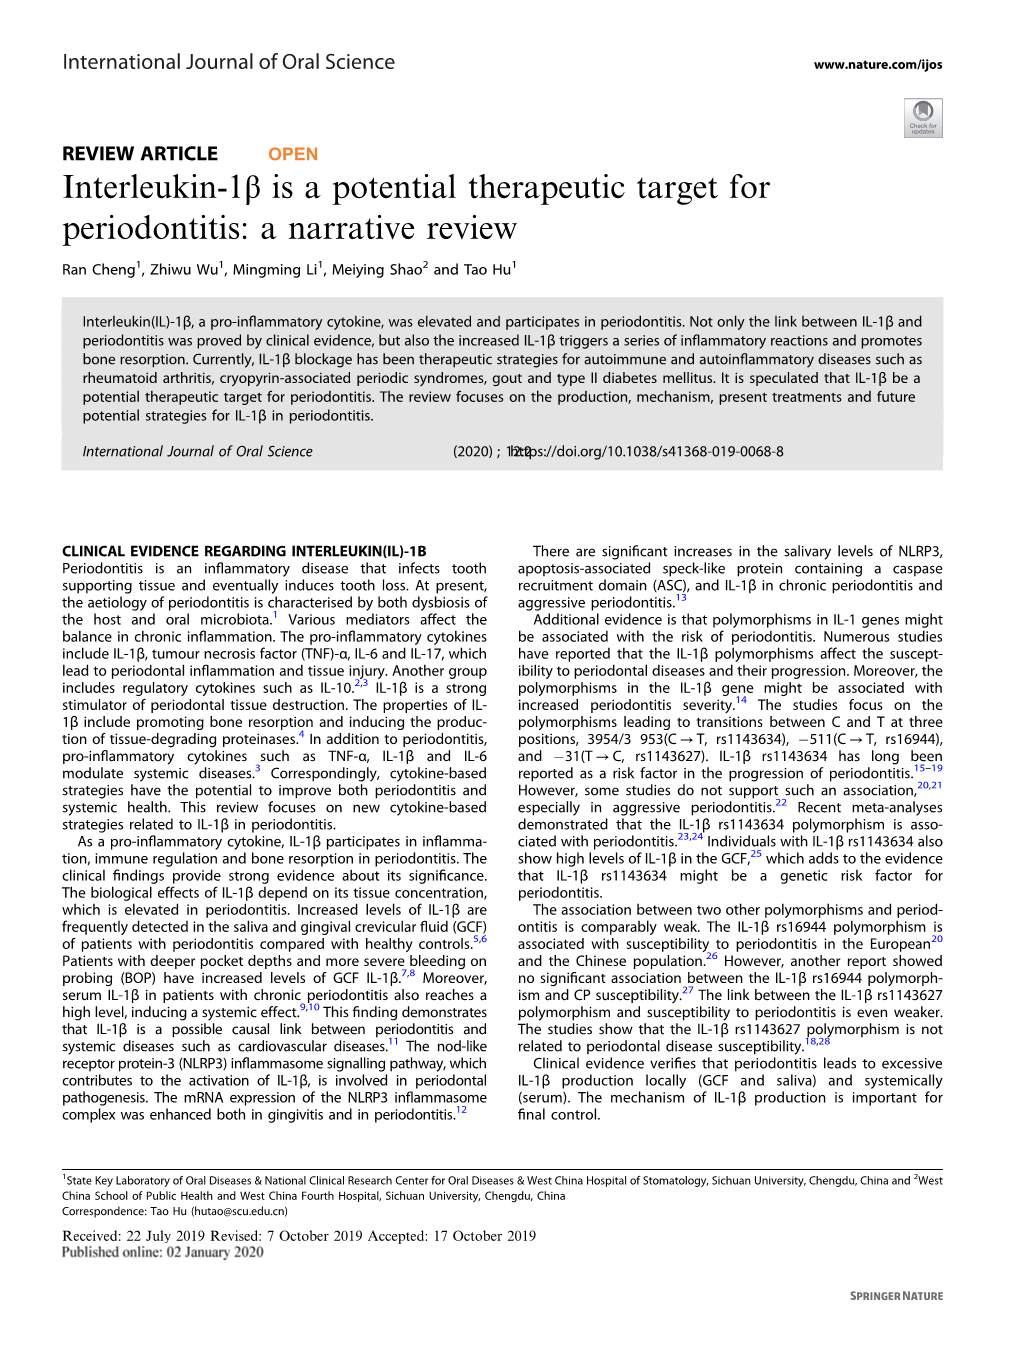 Interleukin-1Β Is a Potential Therapeutic Target for Periodontitis: a Narrative Review